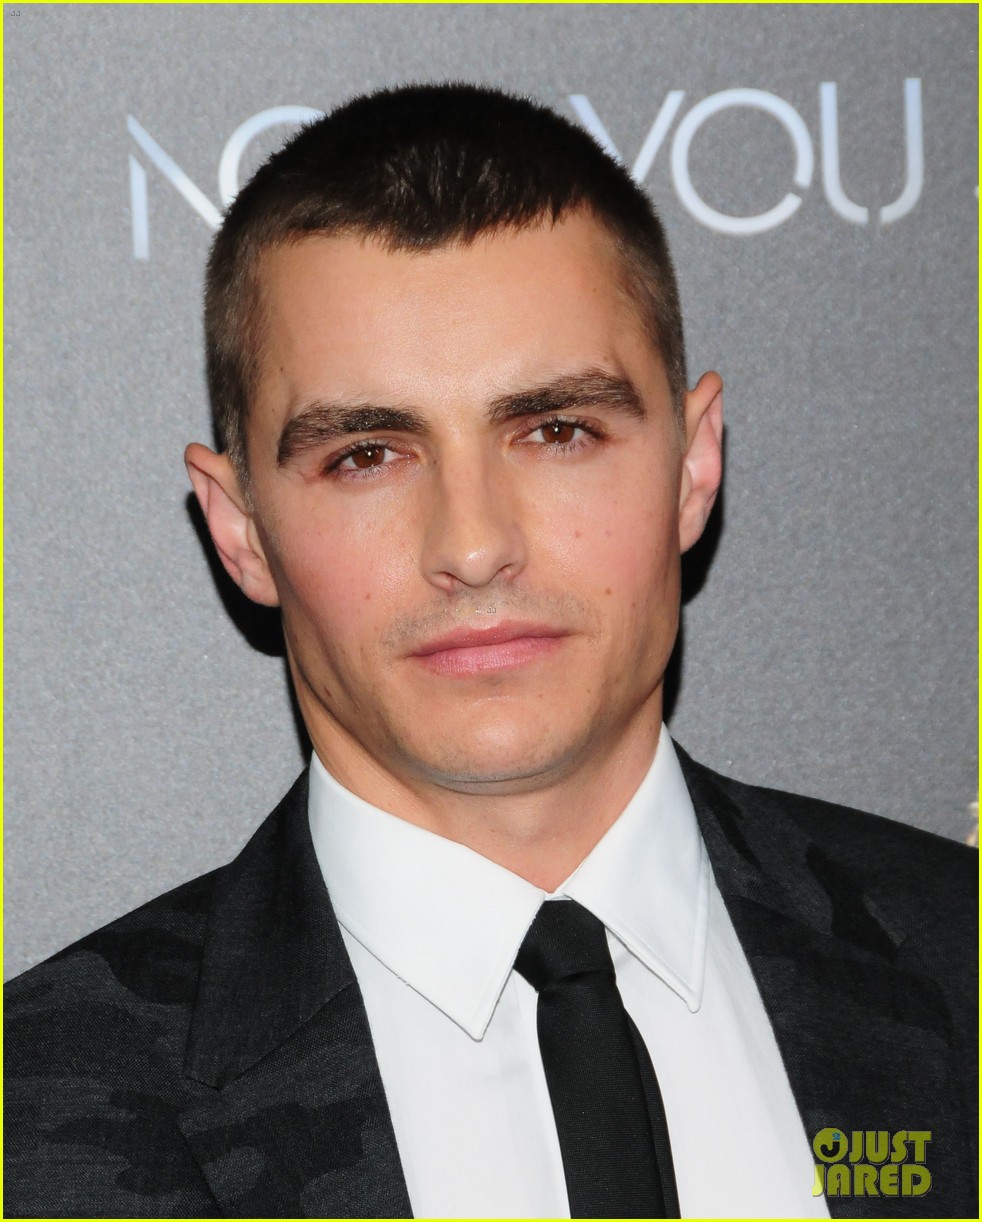 Dave Franco Hairstyle - Food Ideas